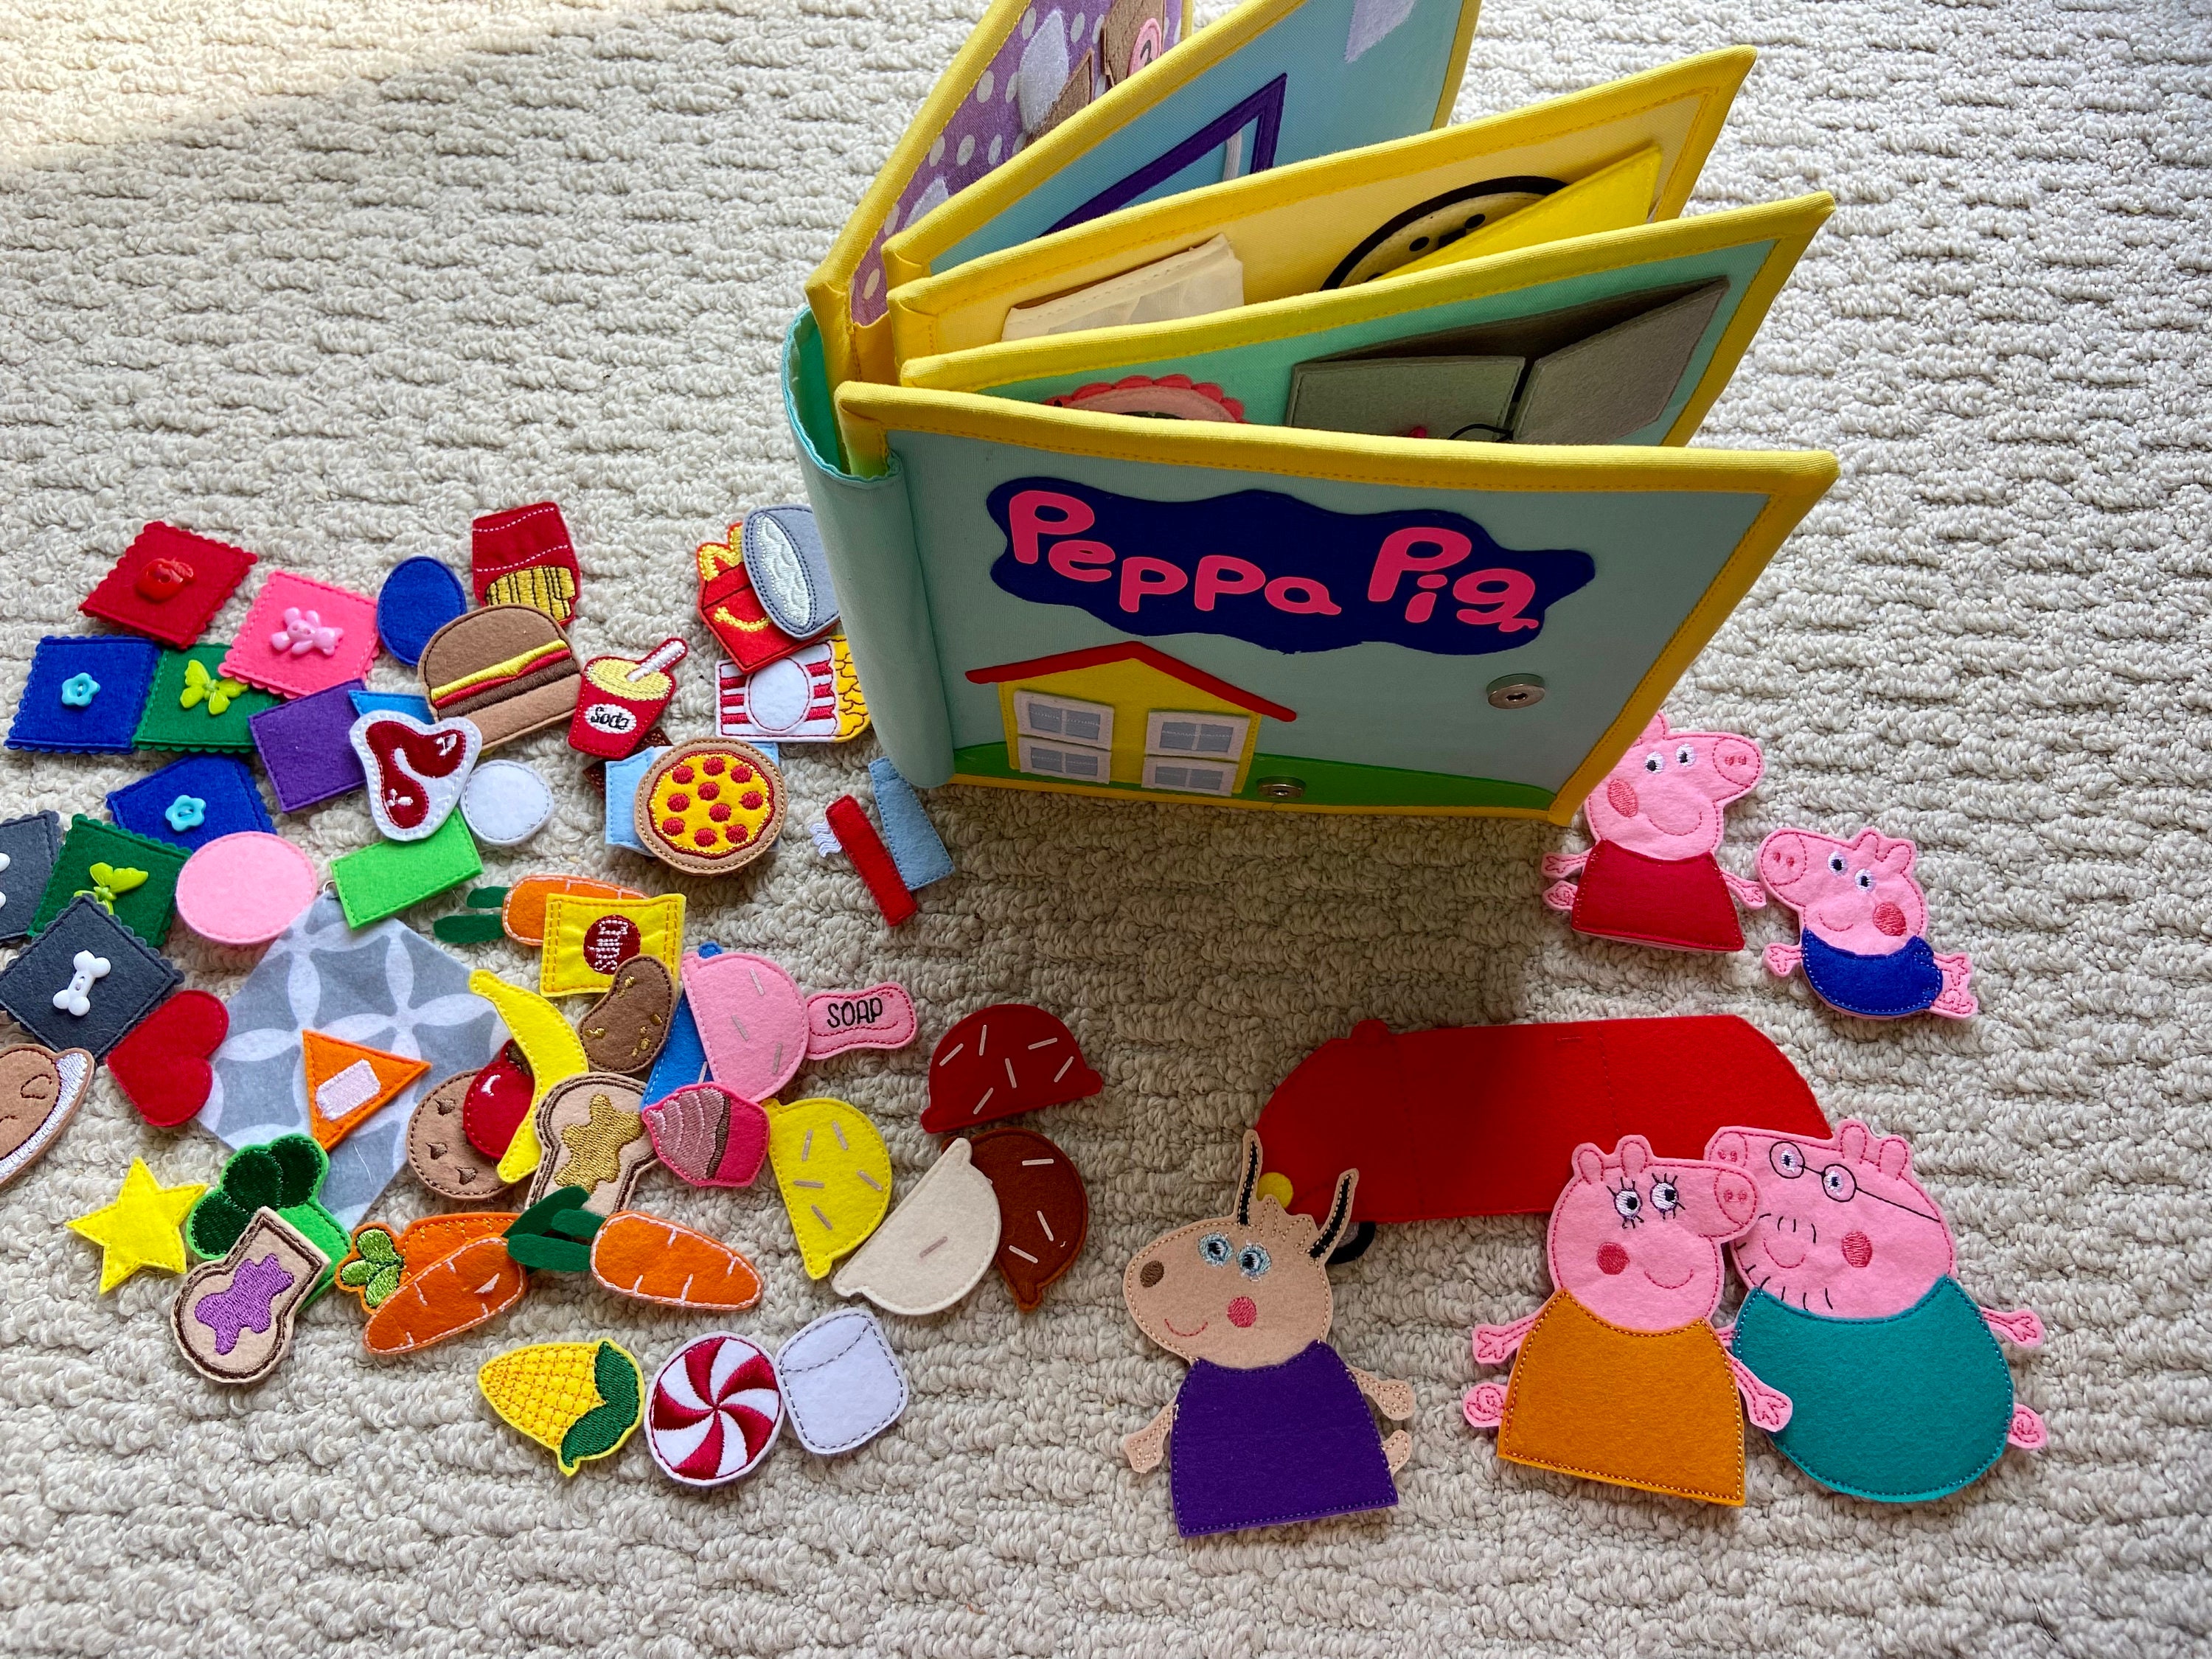  Toomies Peppa Pig's Sensory House - Toddler Sensory Bin with  Shape Sorting and Color Matching Activities - Peppa Pig Montessori Toys -  Toddler Toys Ages 18 Months and Up : Toys & Games